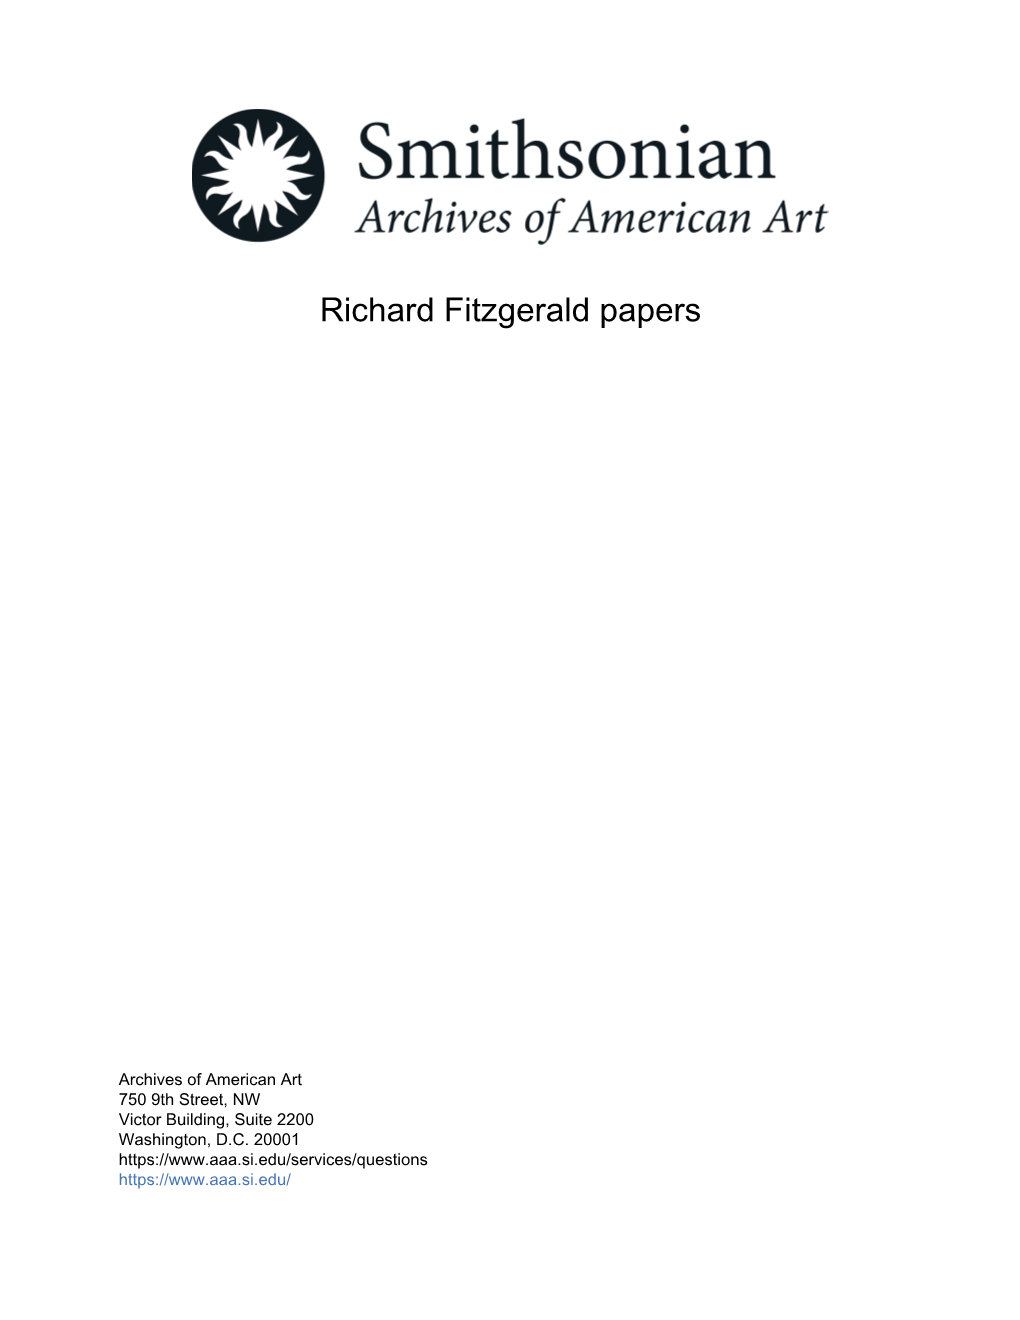 Richard Fitzgerald Papers